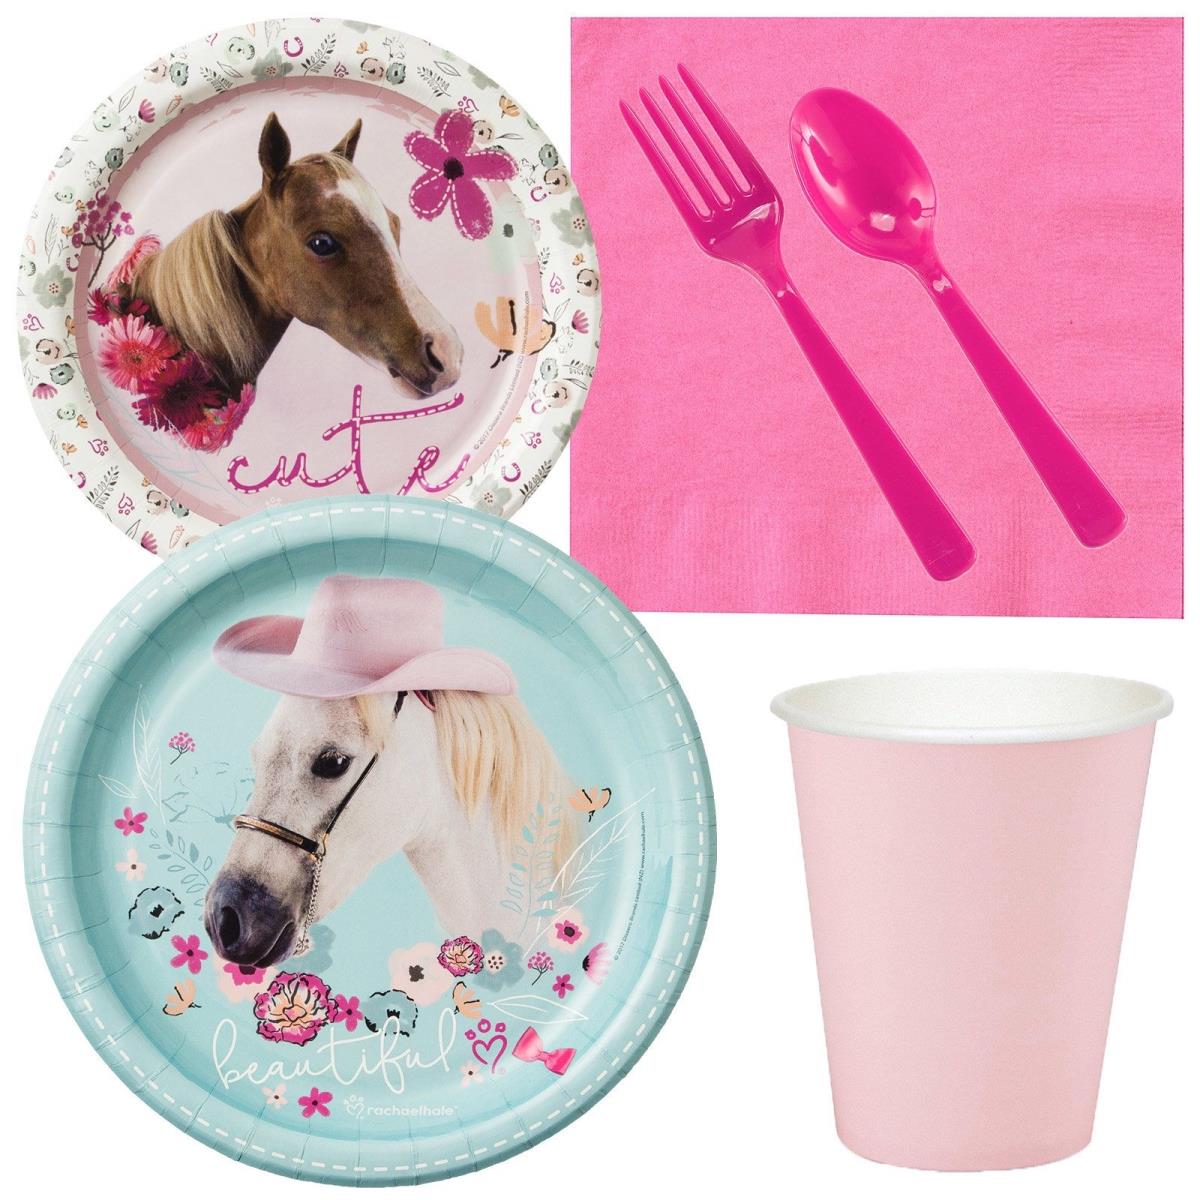 Picture of Costume Supercenter 611901 Rachael Hale Beautiful Horse Standard Tableware Kit - Pack of 8